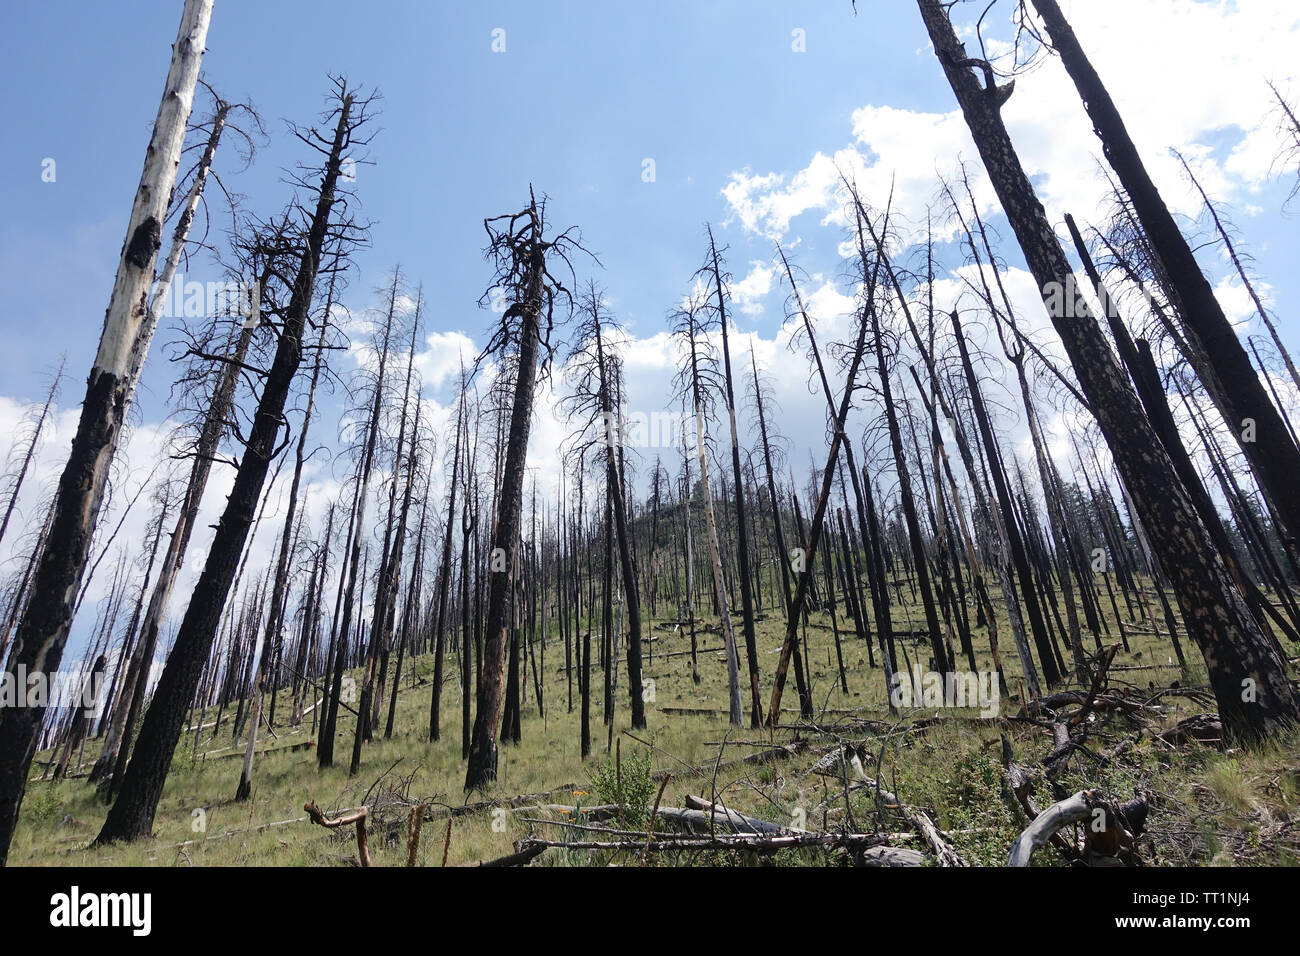 Dead trees remain after a wildfire scorched the area. Stock Photo